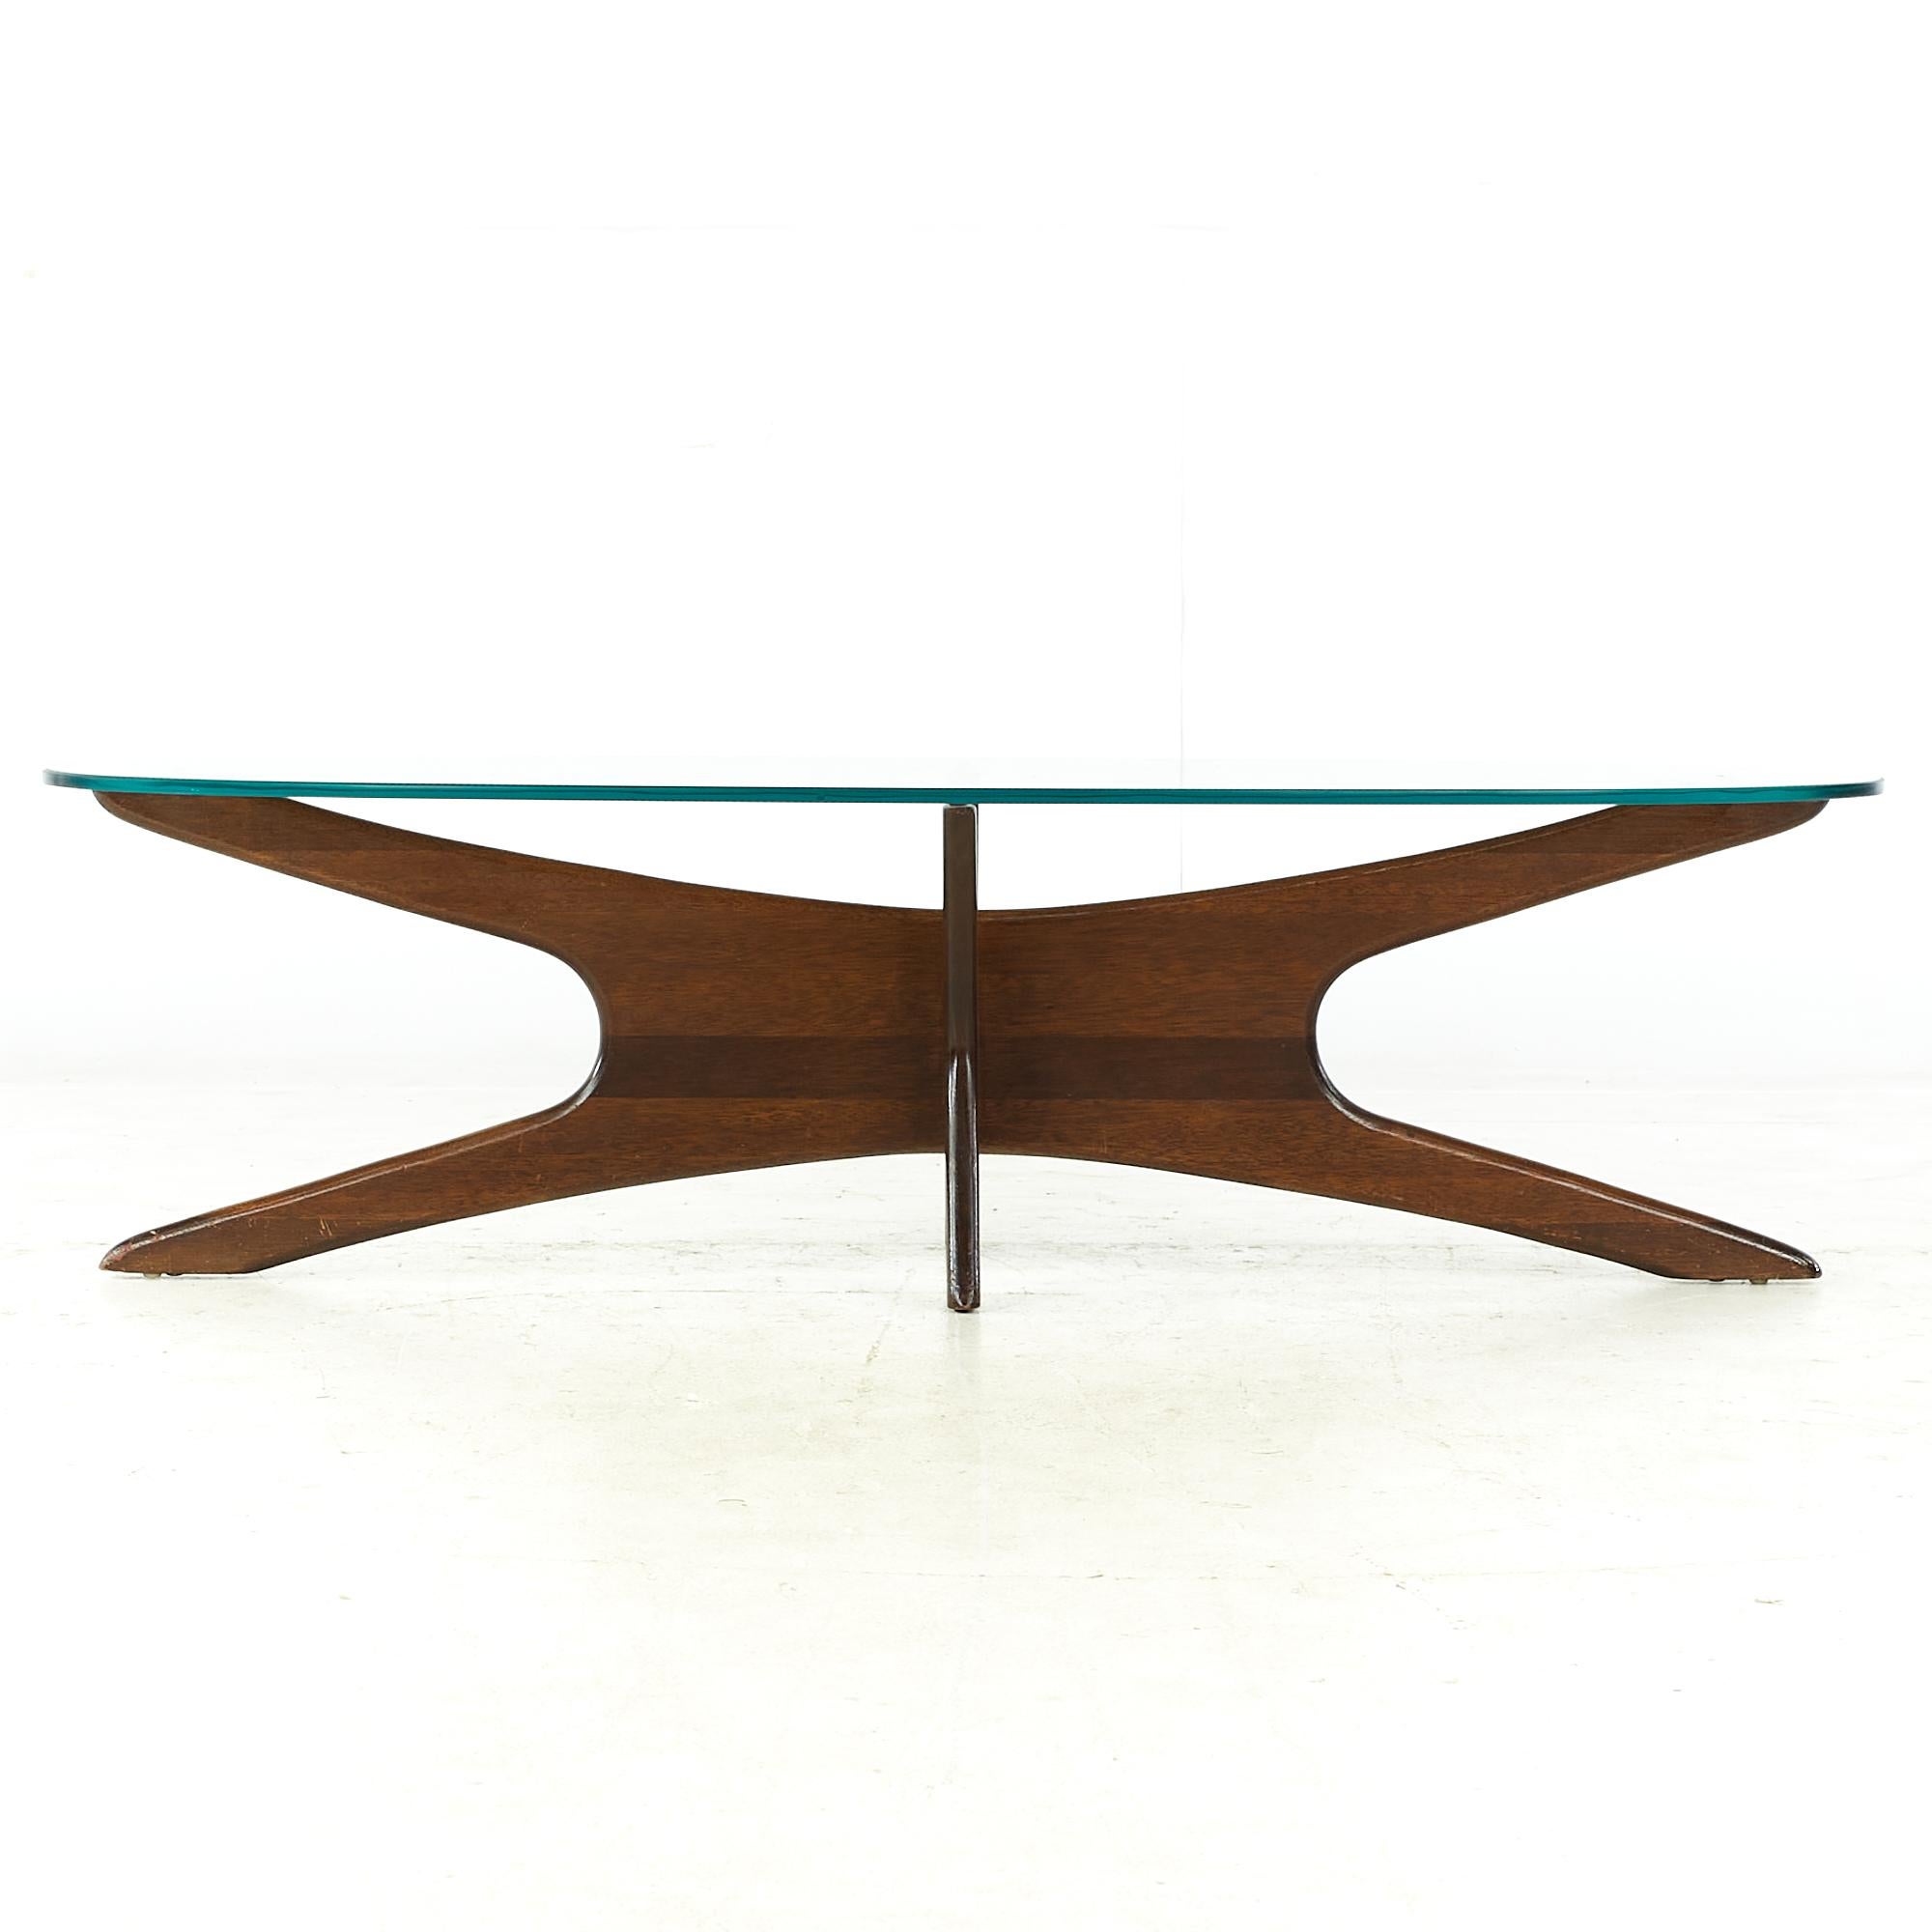 Adrian Pearsall midcentury walnut jacks coffee table.

This table measures: 60 wide x 20.75 wide x 17 inches high.

All pieces of furniture can be had in what we call restored vintage condition. That means the piece is restored upon purchase so